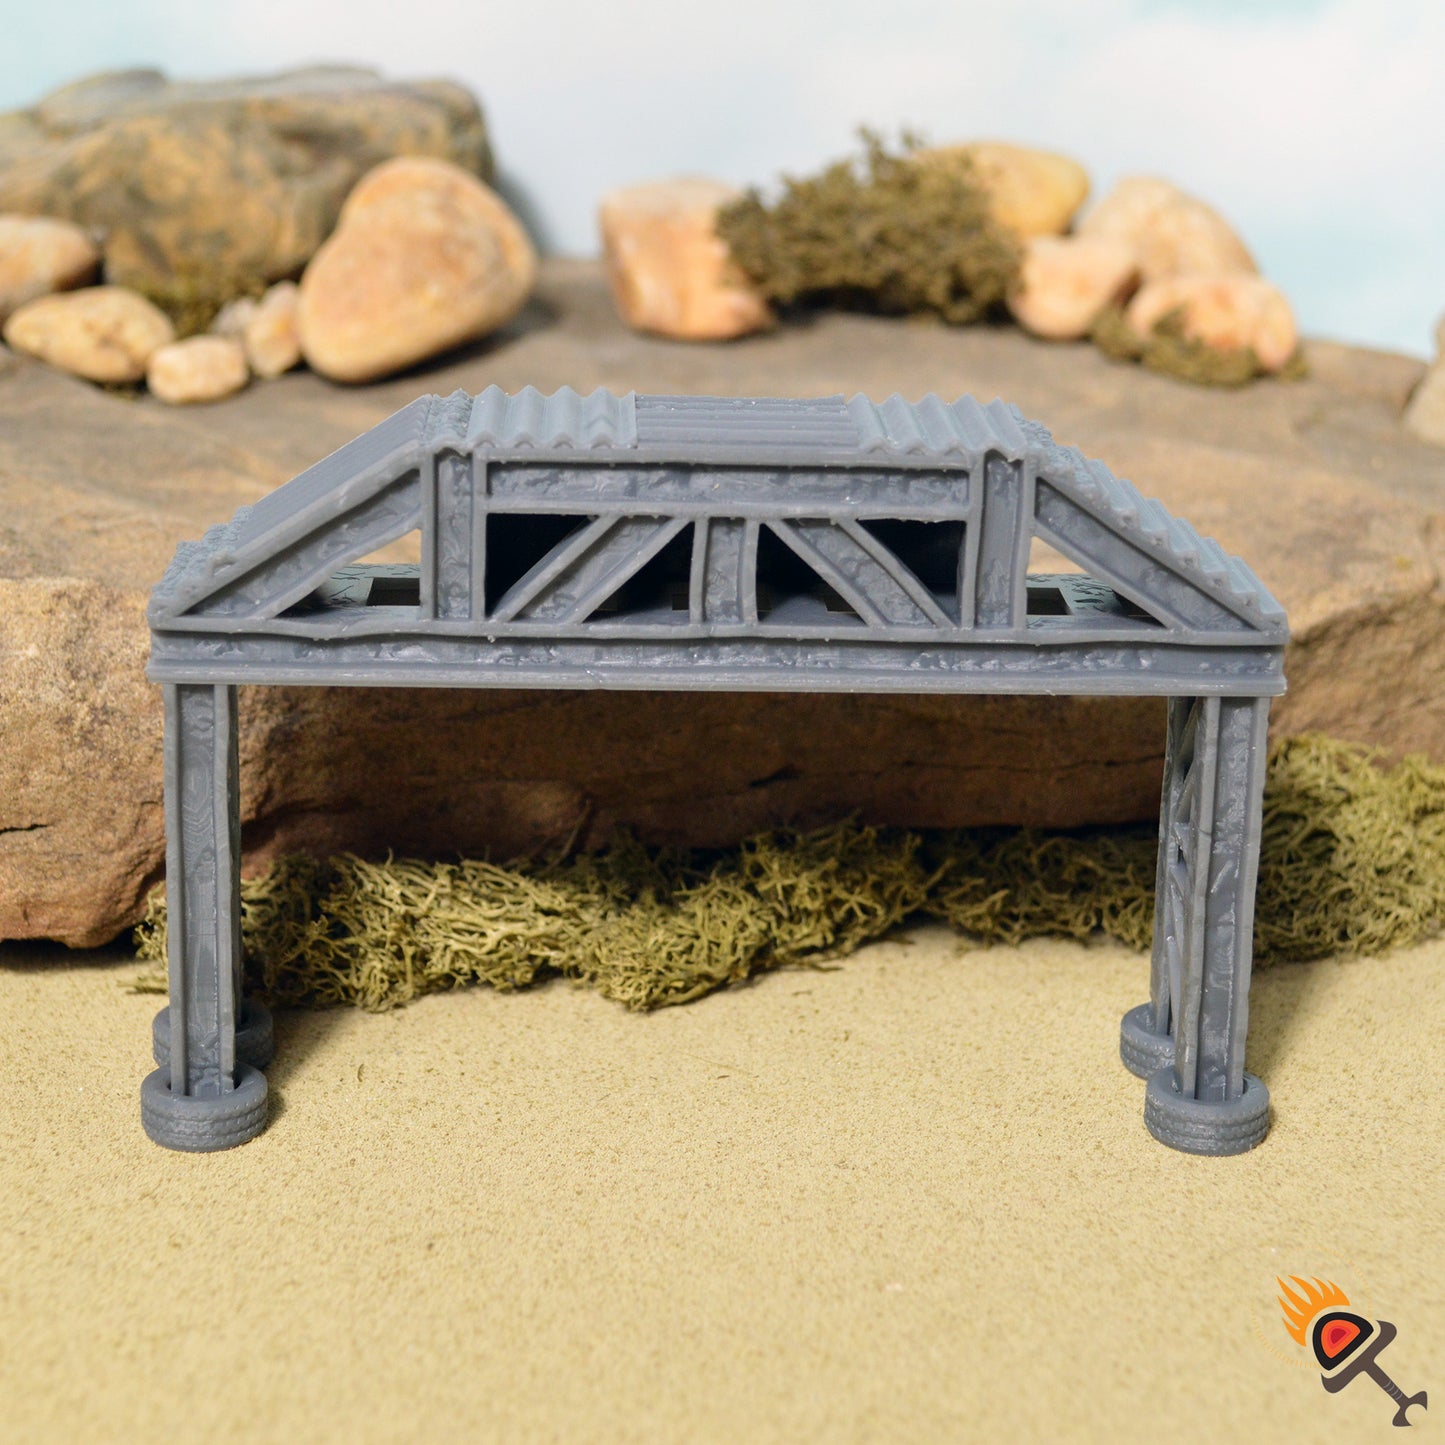 Gaslands Checkpoints Set of 4 for Gaslands Terrain 15mm 20mm 28mm 32mm, Fallout Urban Post Apocalyptic Race Track, Gift for Tabletop Gamers